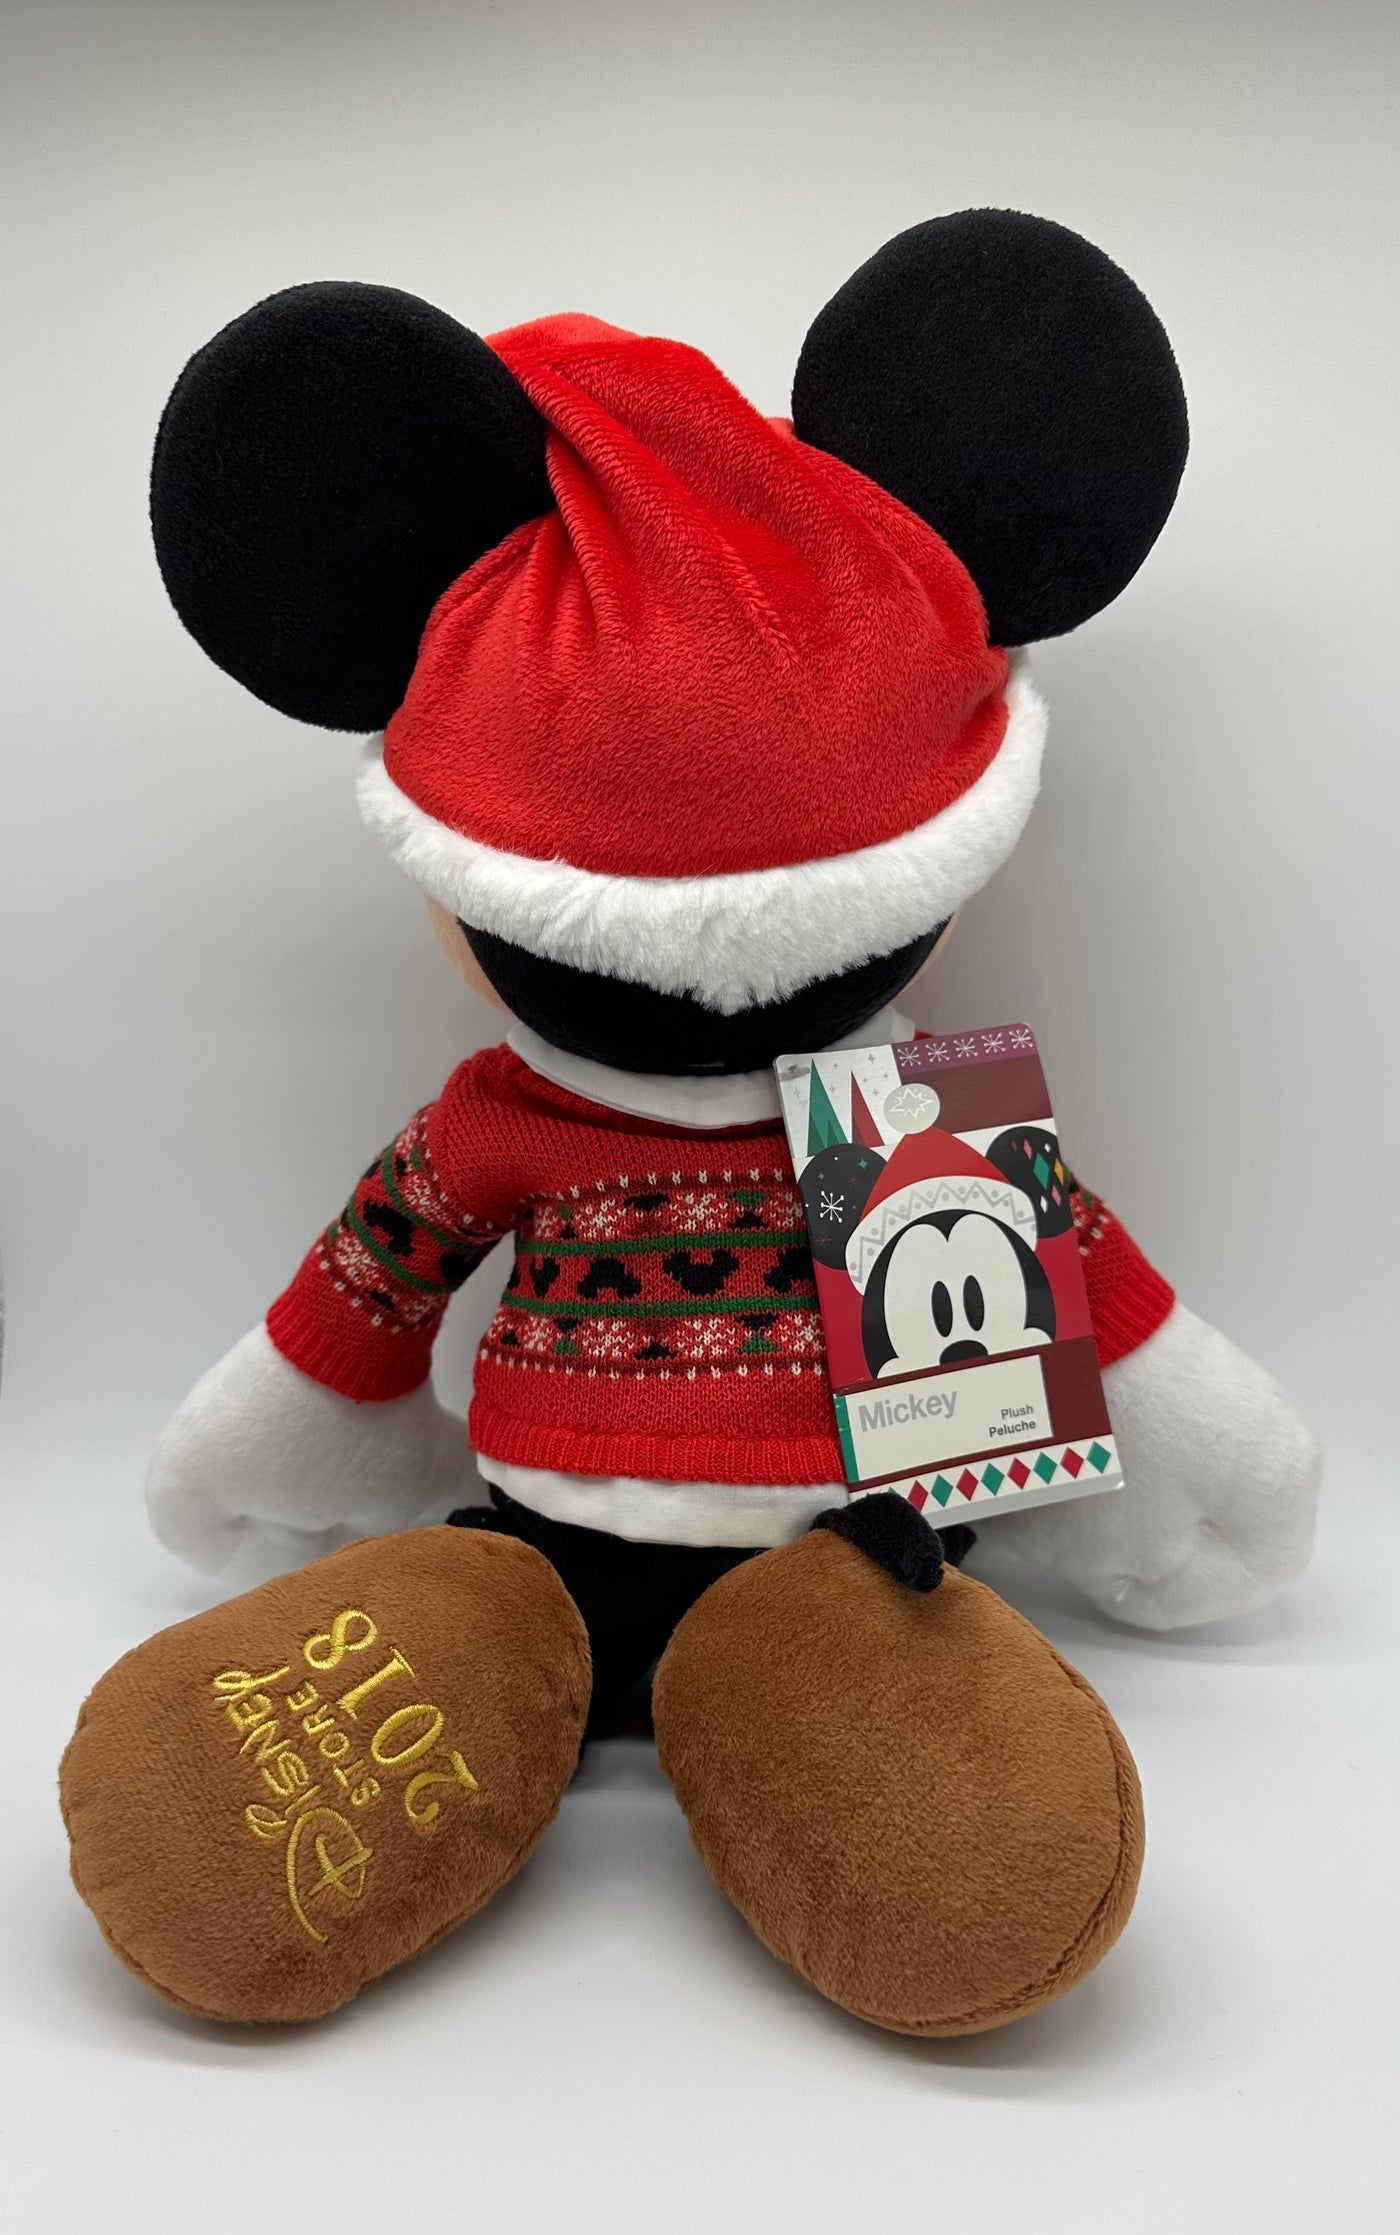 Disney Store Authentic 2018 Christmas Mickey Winter Sweater Plush New with Tags